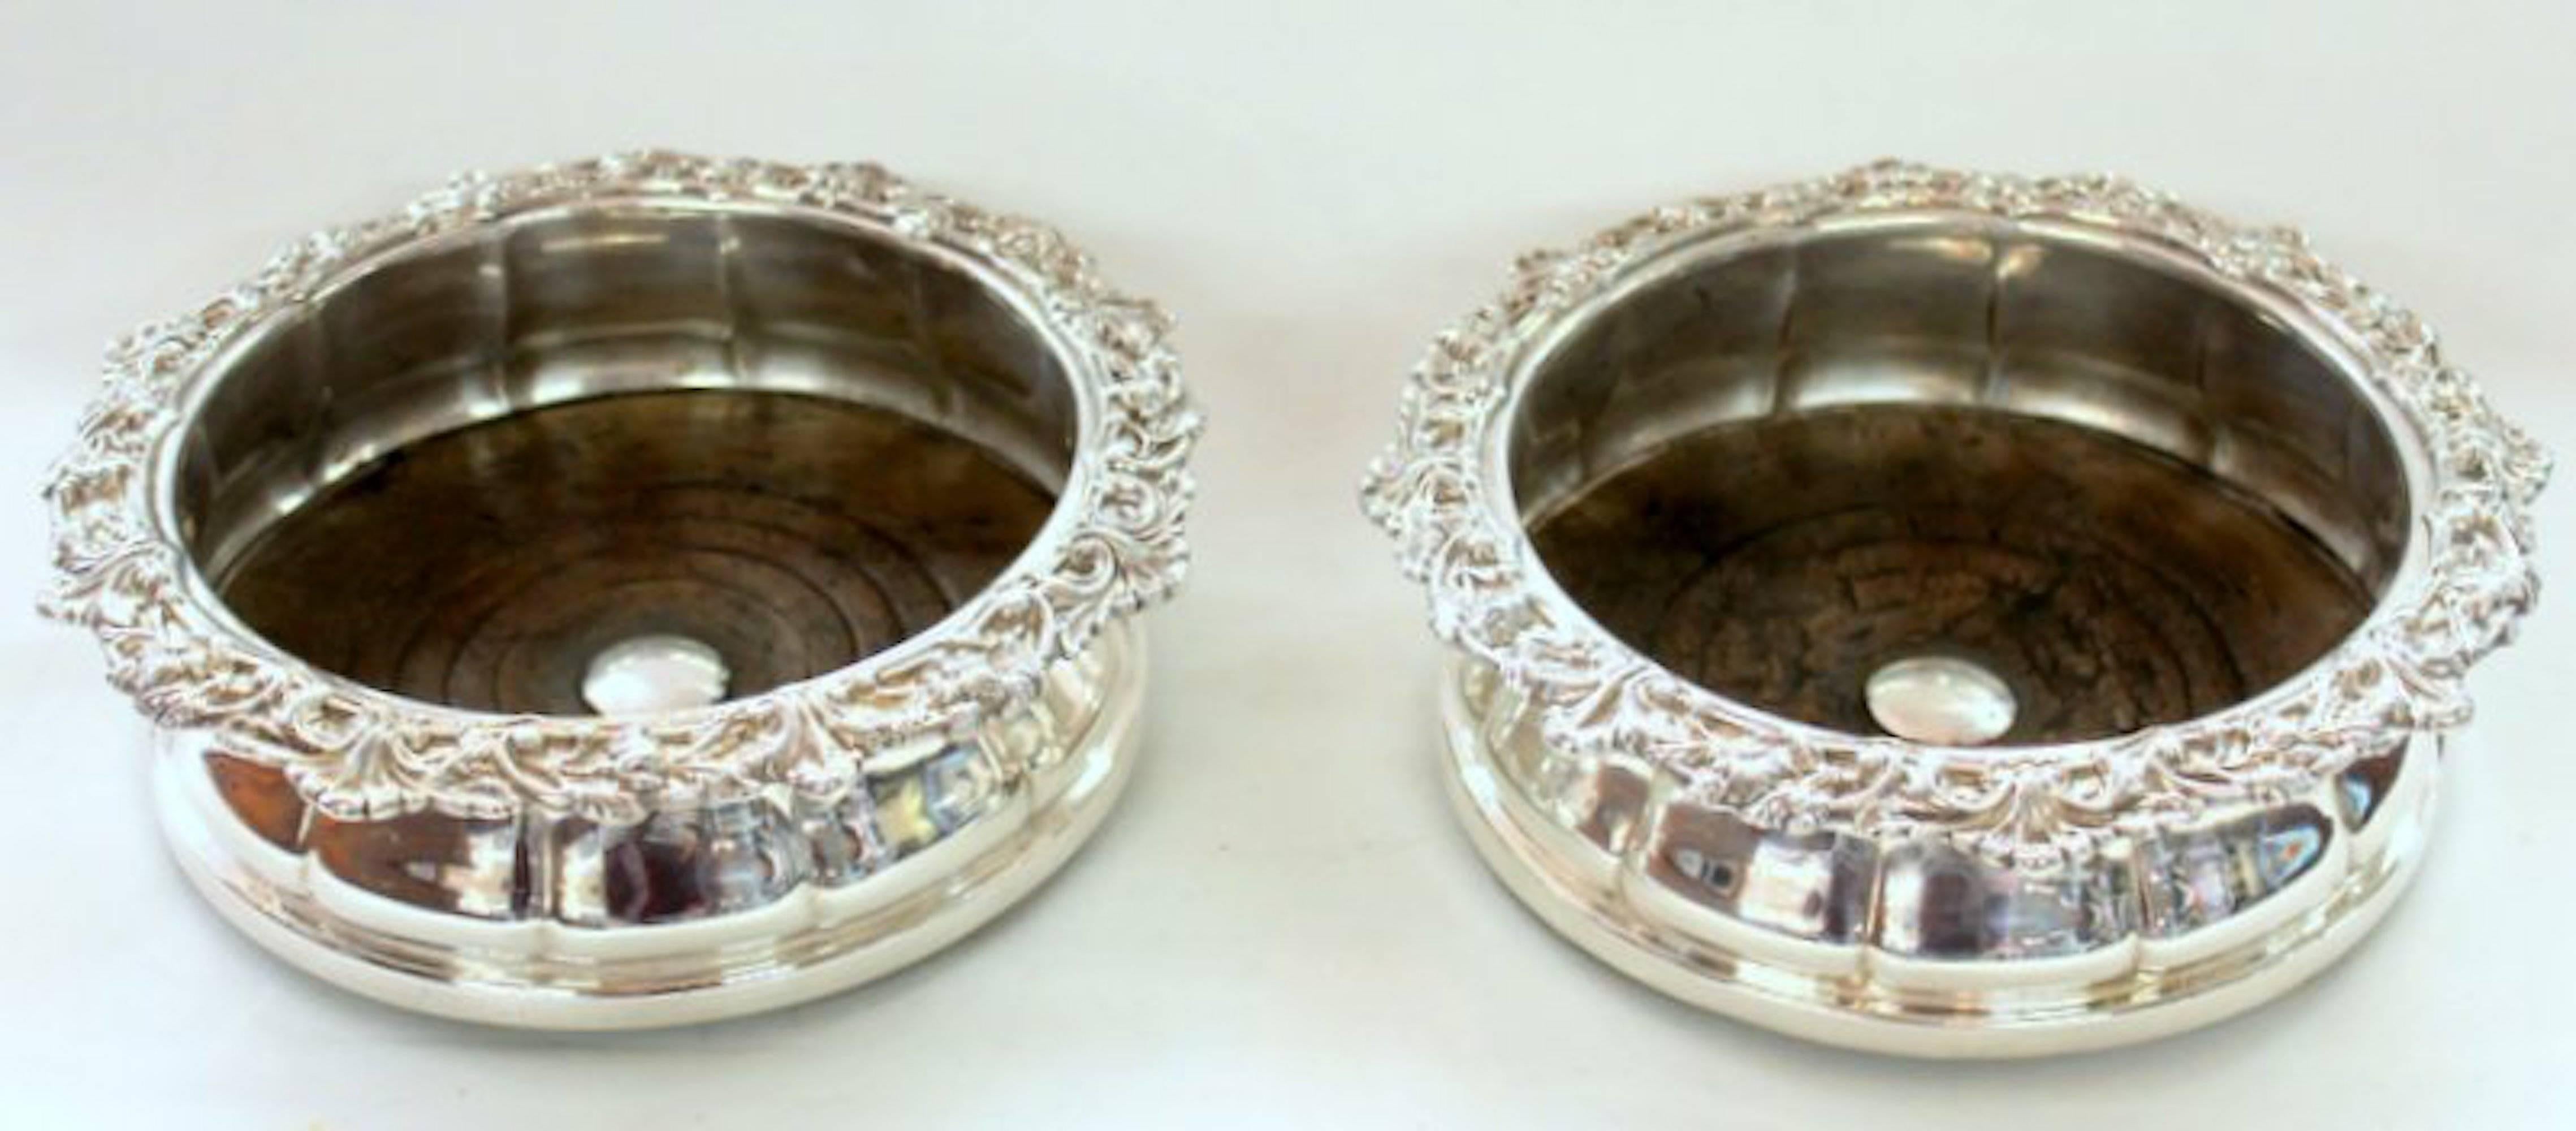 English Pair of Fabulous Geo. III Old Sheffield Plate Rococo Belly Shape Bottle Coasters